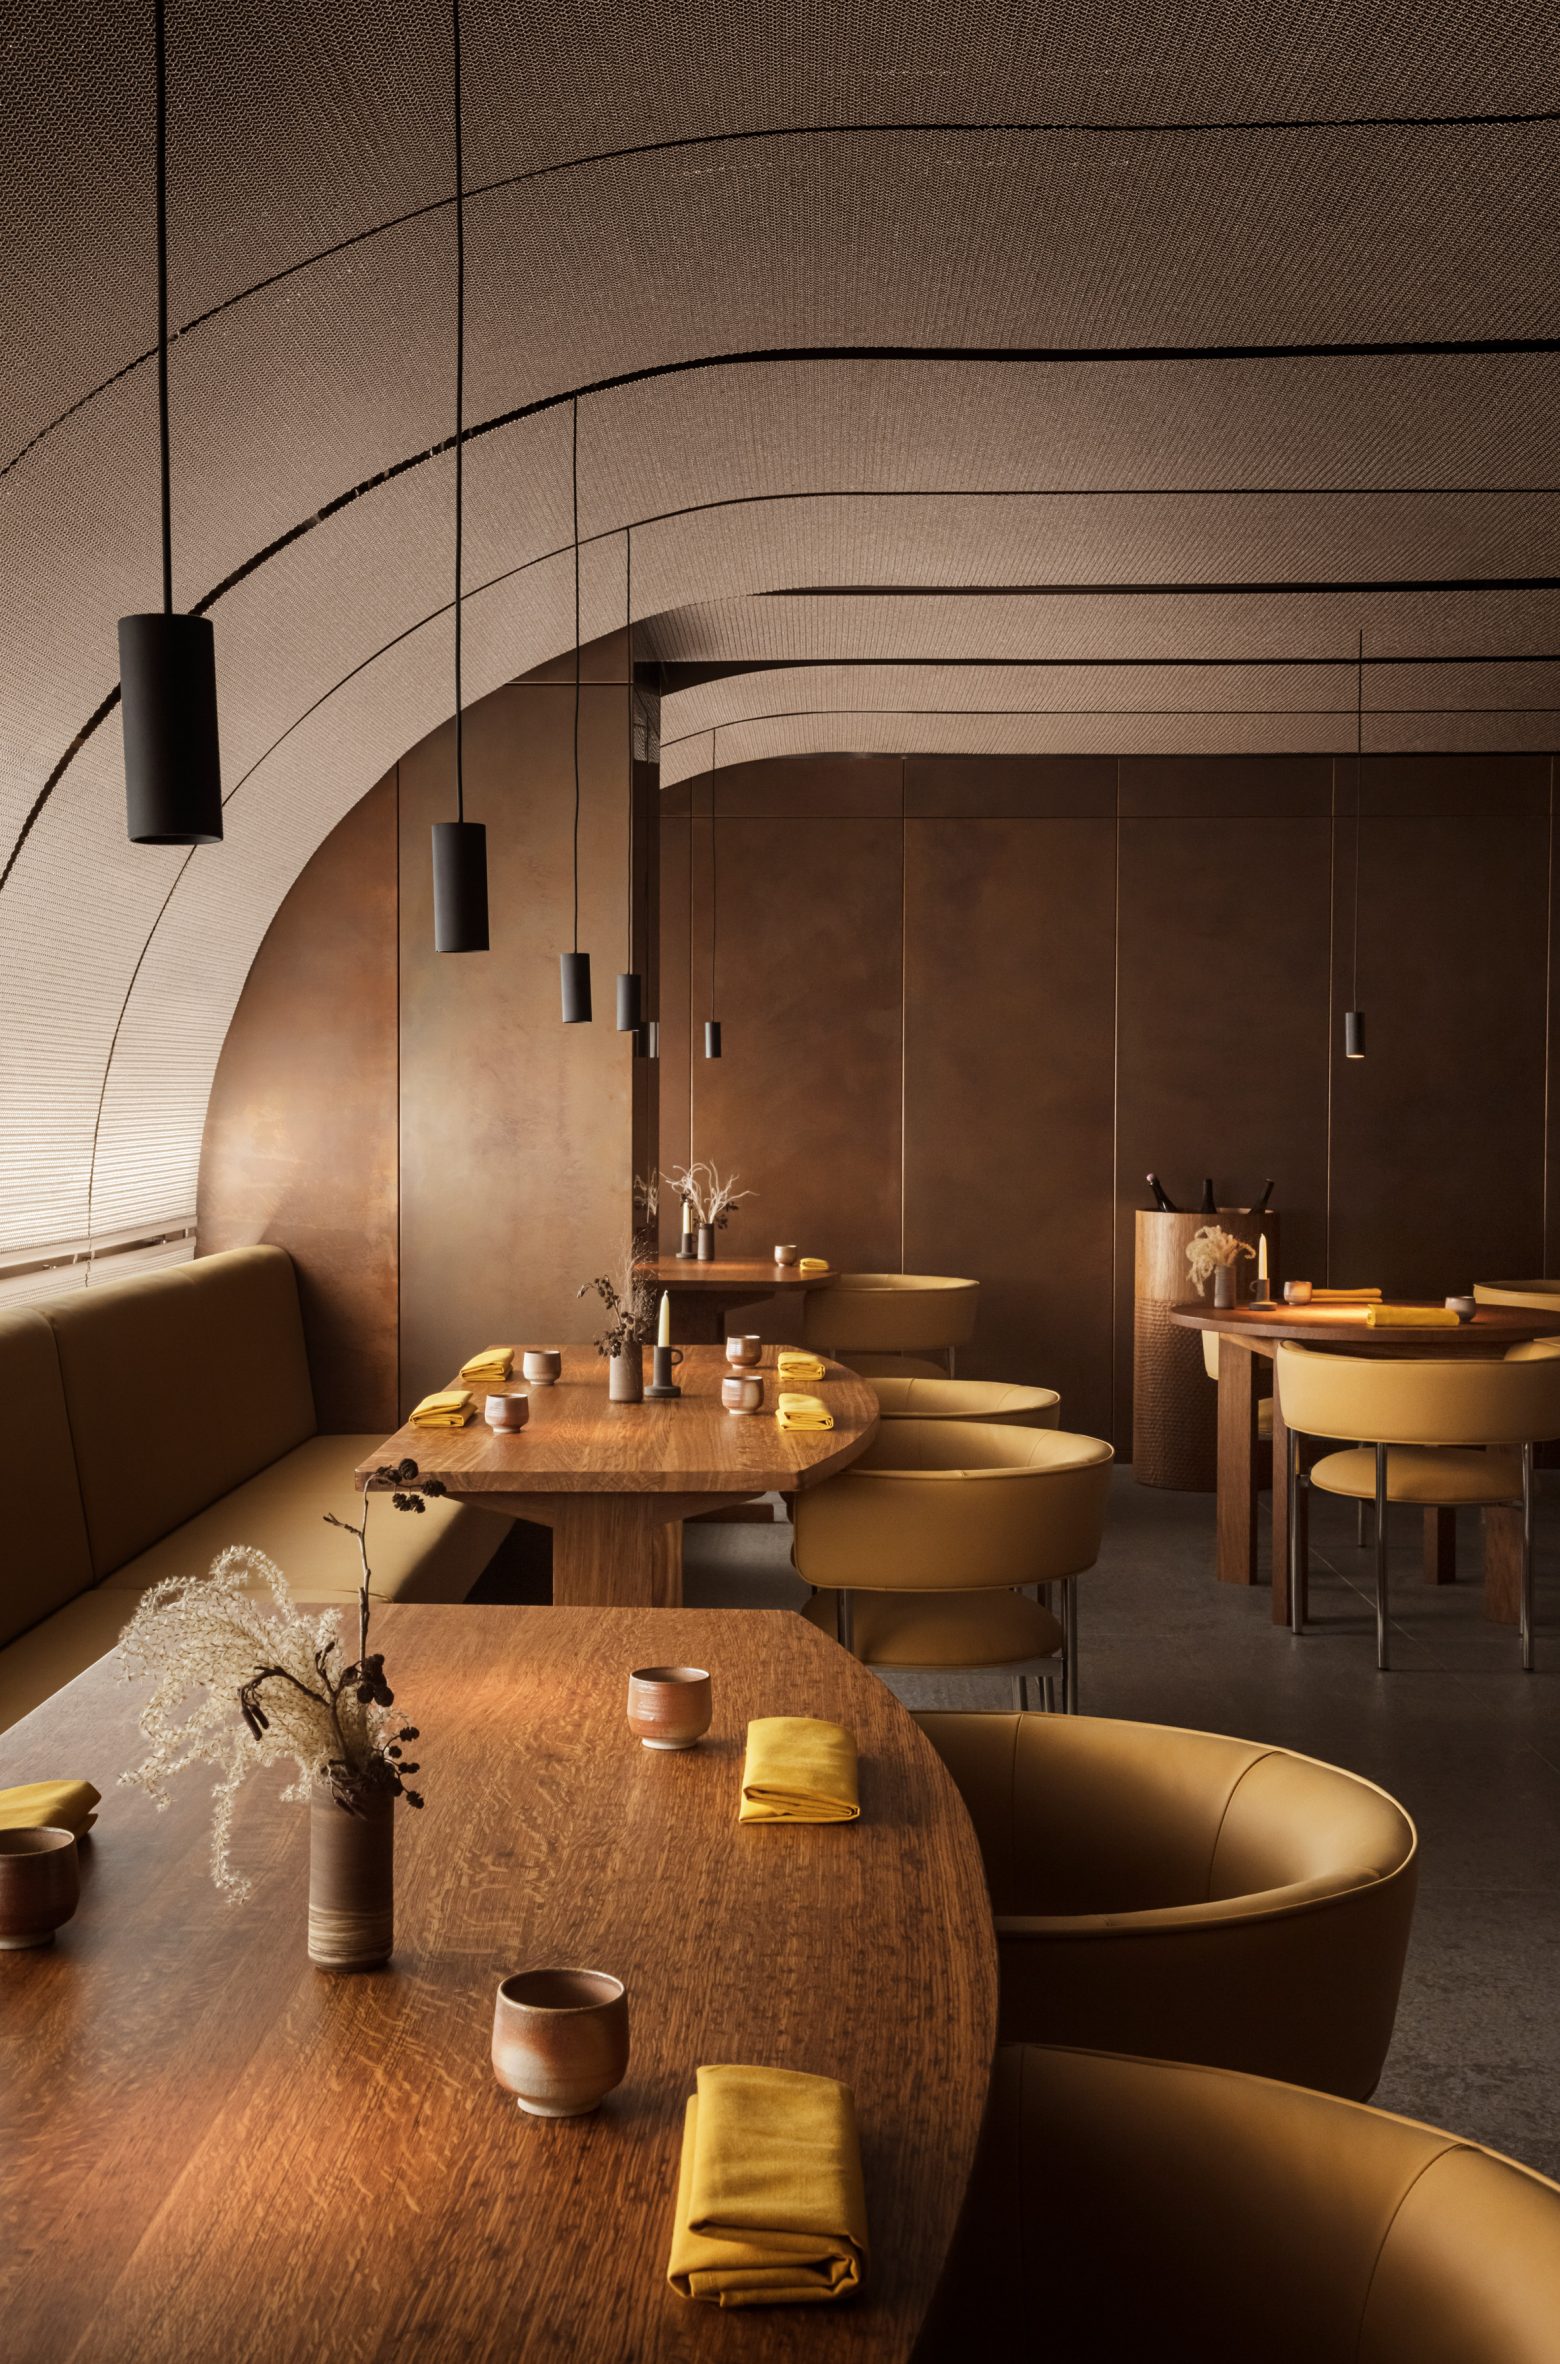 Curved walls in London restaurant by Studio David Thulstrup 